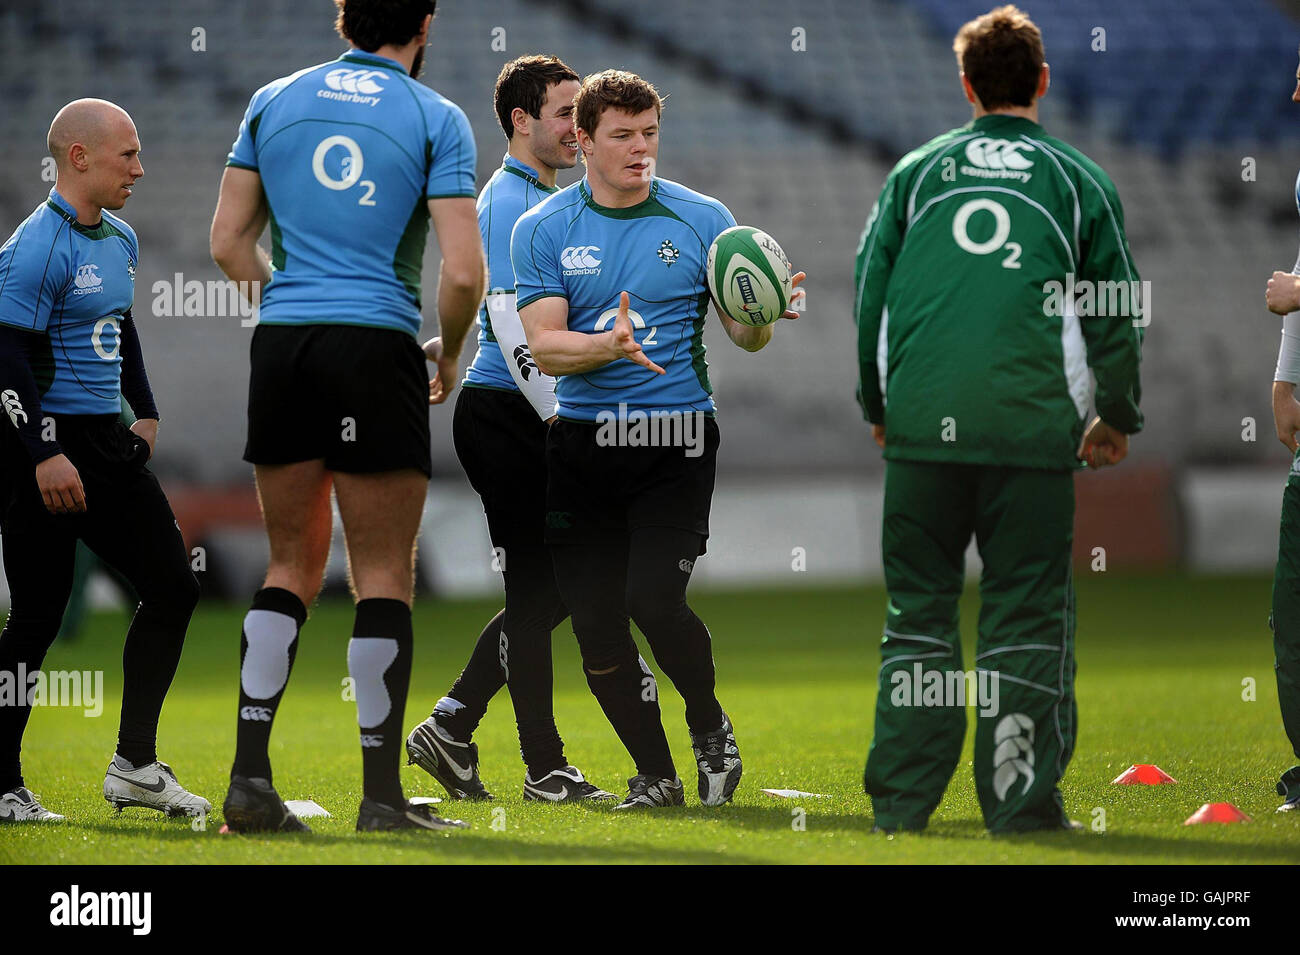 Rugby Union - RBS 6 Nations Championship 2008 - Ireland Training Session - Croke Park Stock Photo